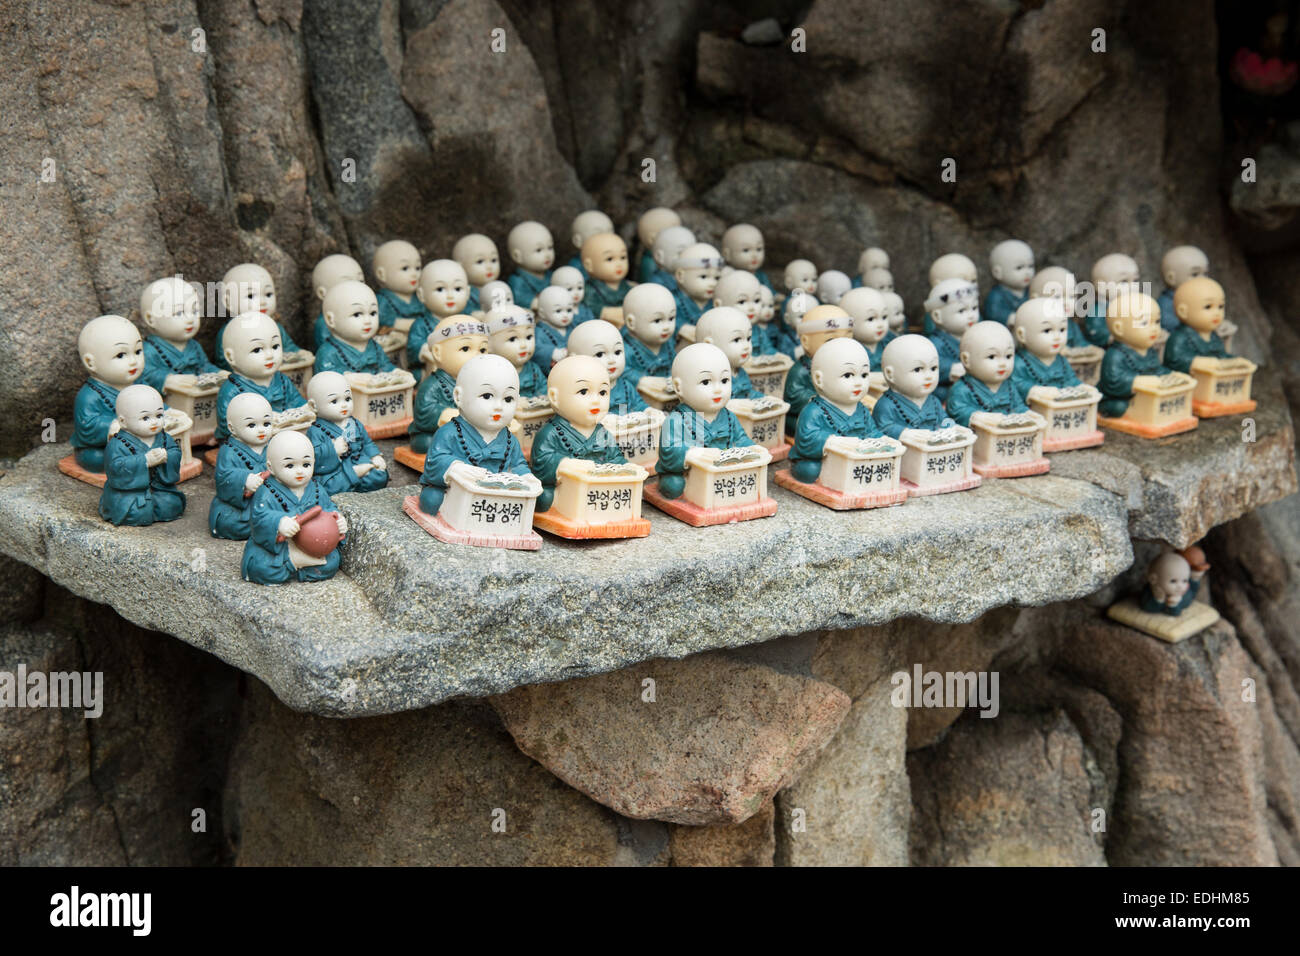 Porcelain figurines of monks at a temple in South Korea Stock Photo